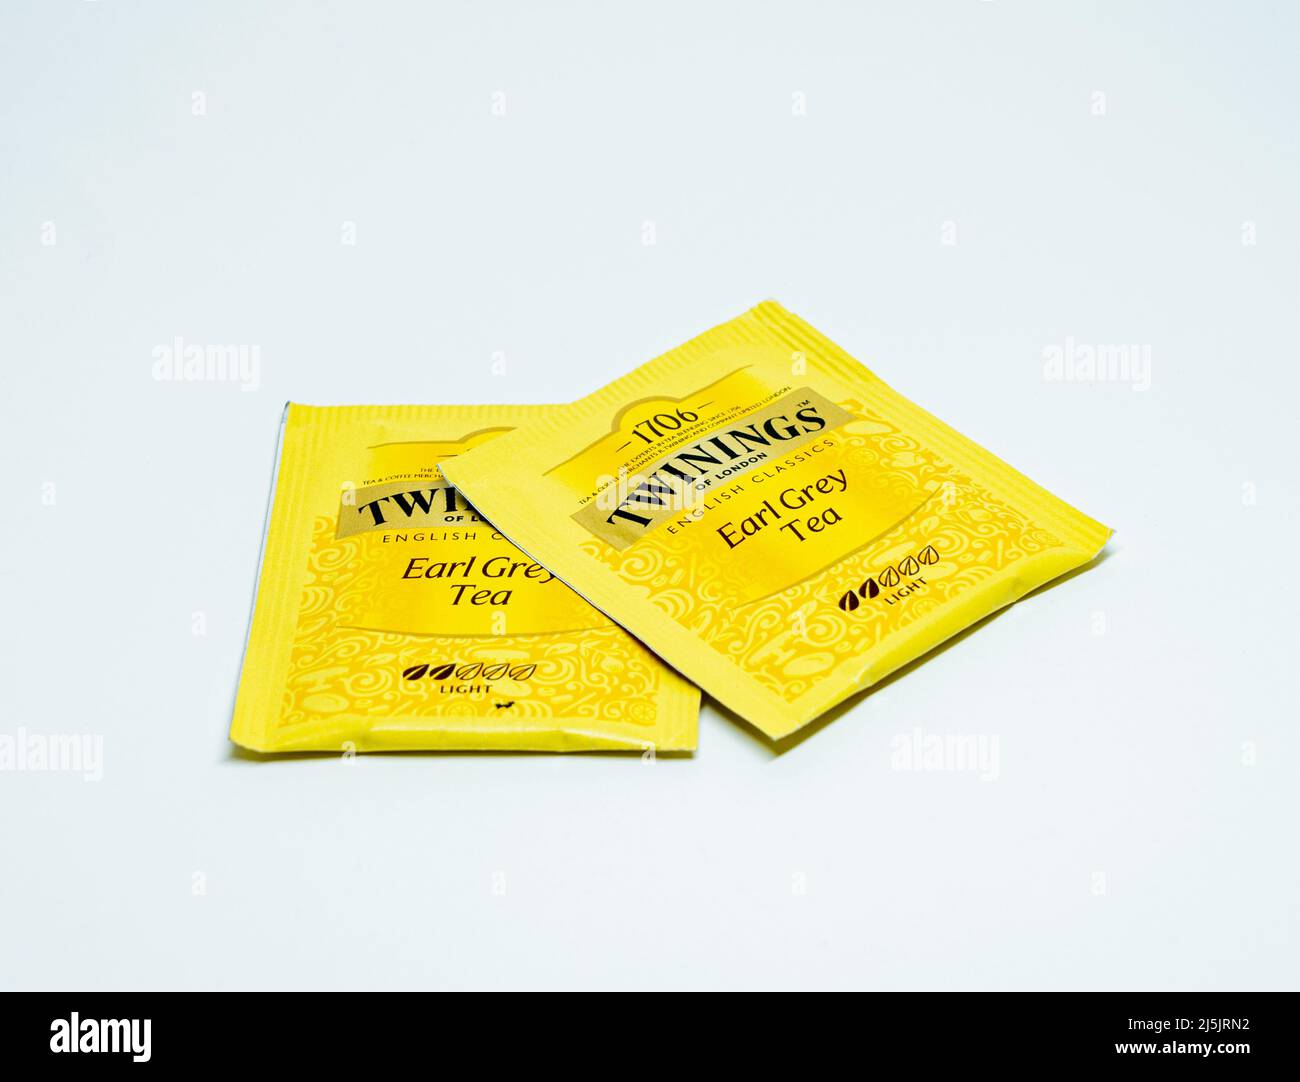 Two packets of Twinings Earl Grey tea on a white paper background. Stock Photo